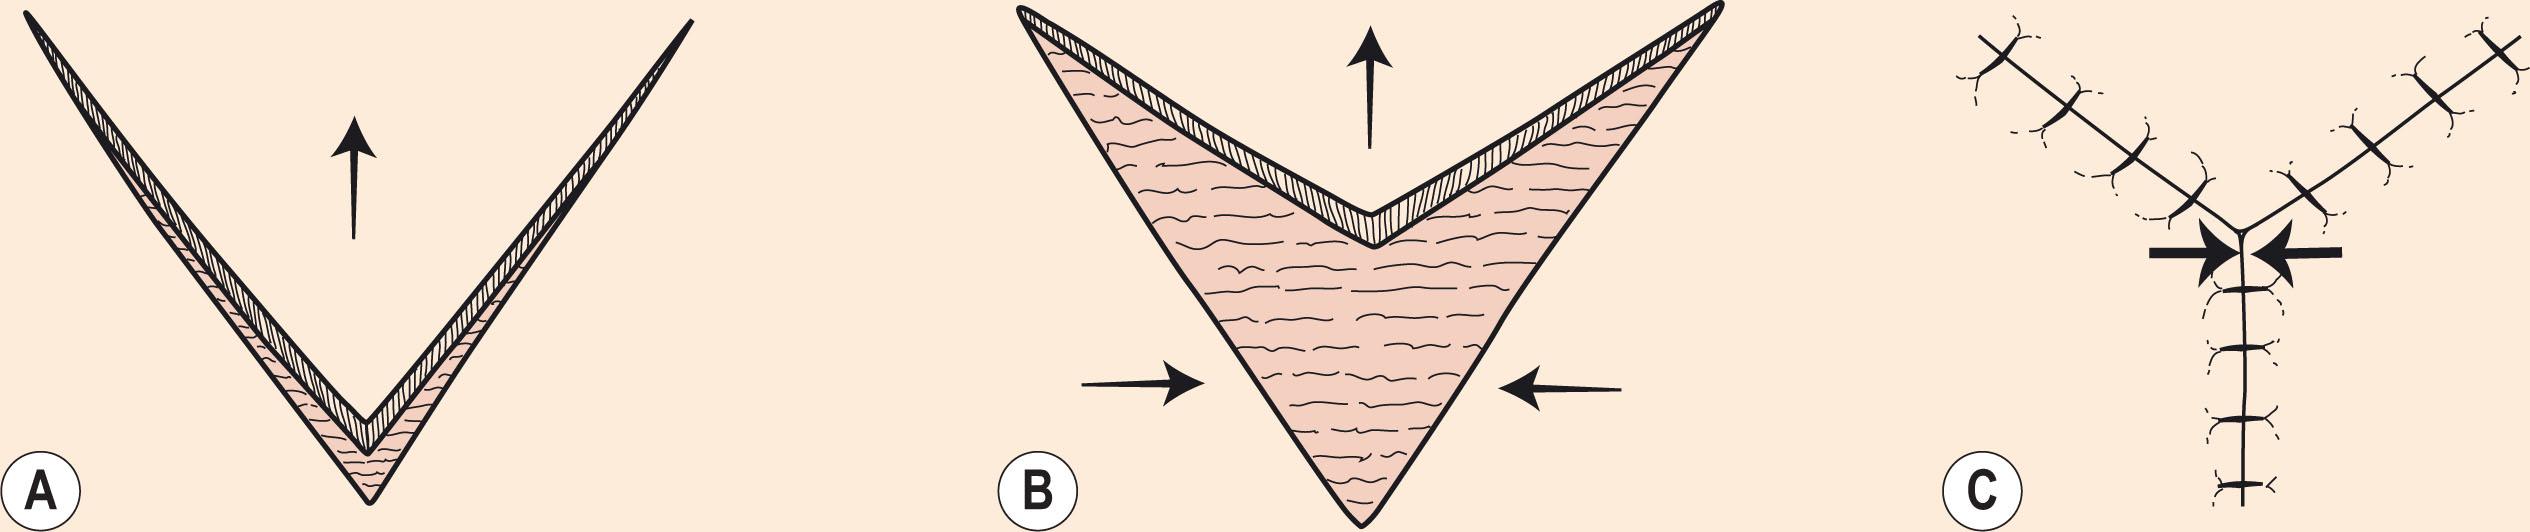 Figure 10.10, V–Y flap. (A) The V-shaped flap is not stretched or pulled toward the defect. (B) Advancement is achieved instead by recoil or being pushed forward. (C) Wound closure suture line results in a Y configuration. Greatest wound tension occurs at the donor site (opposing arrows).